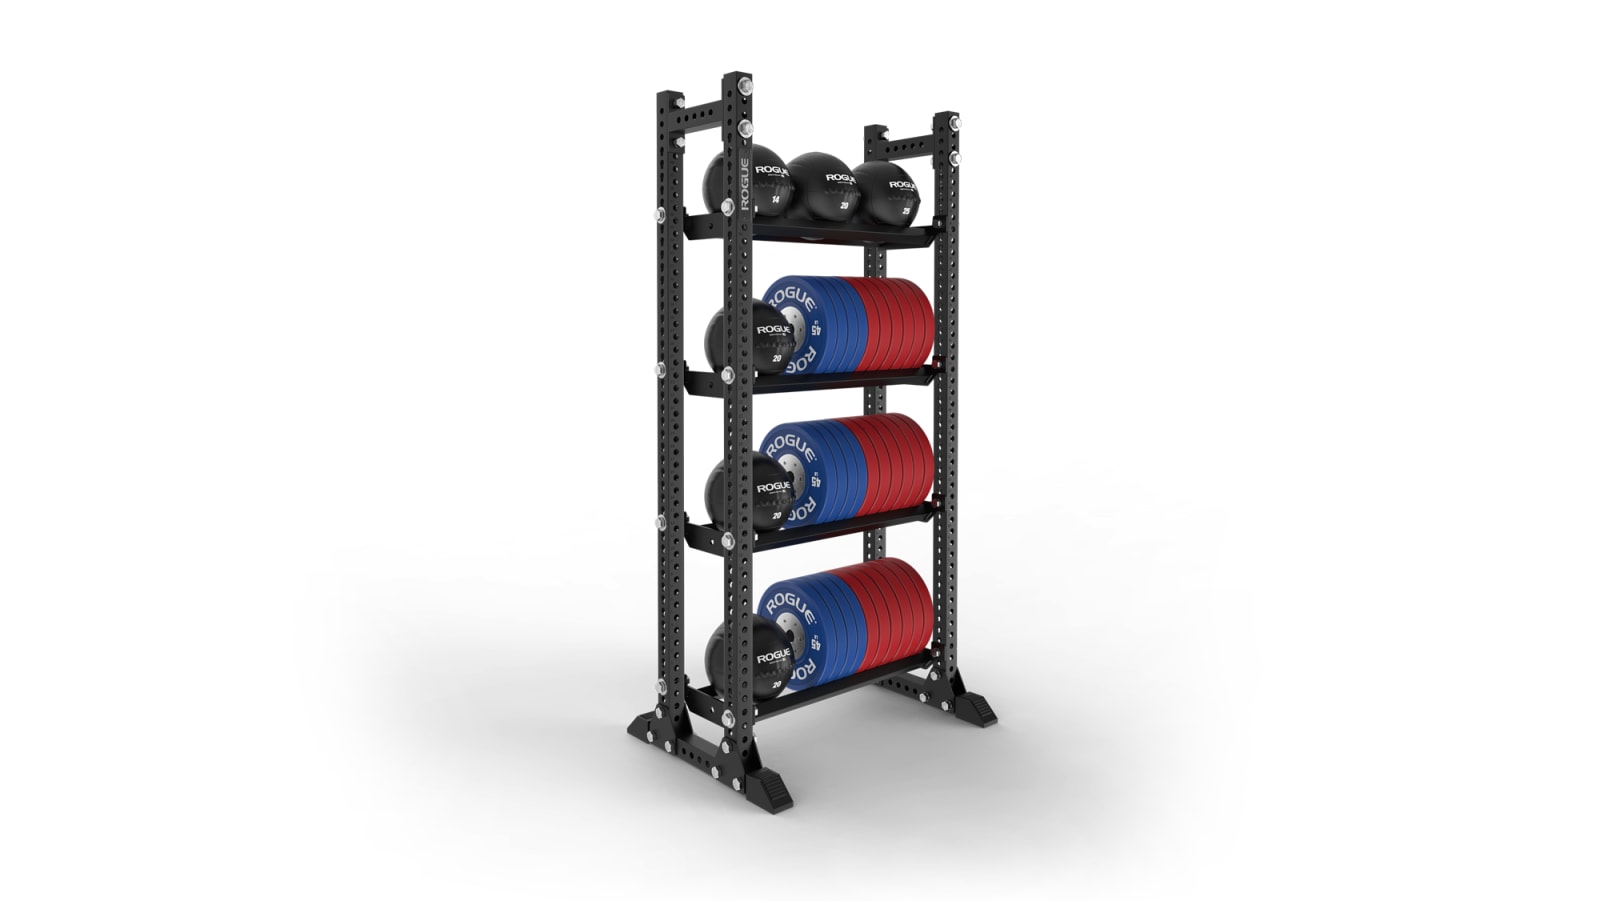 https://assets.roguefitness.com/f_auto,q_auto,c_limit,w_1600,b_rgb:ffffff/catalog/Weightlifting%20Bars%20and%20Plates/Storage/Plate%20Storage/MONSTERMASS/43W/MONSTERMASS-100-H_xin7gr.png